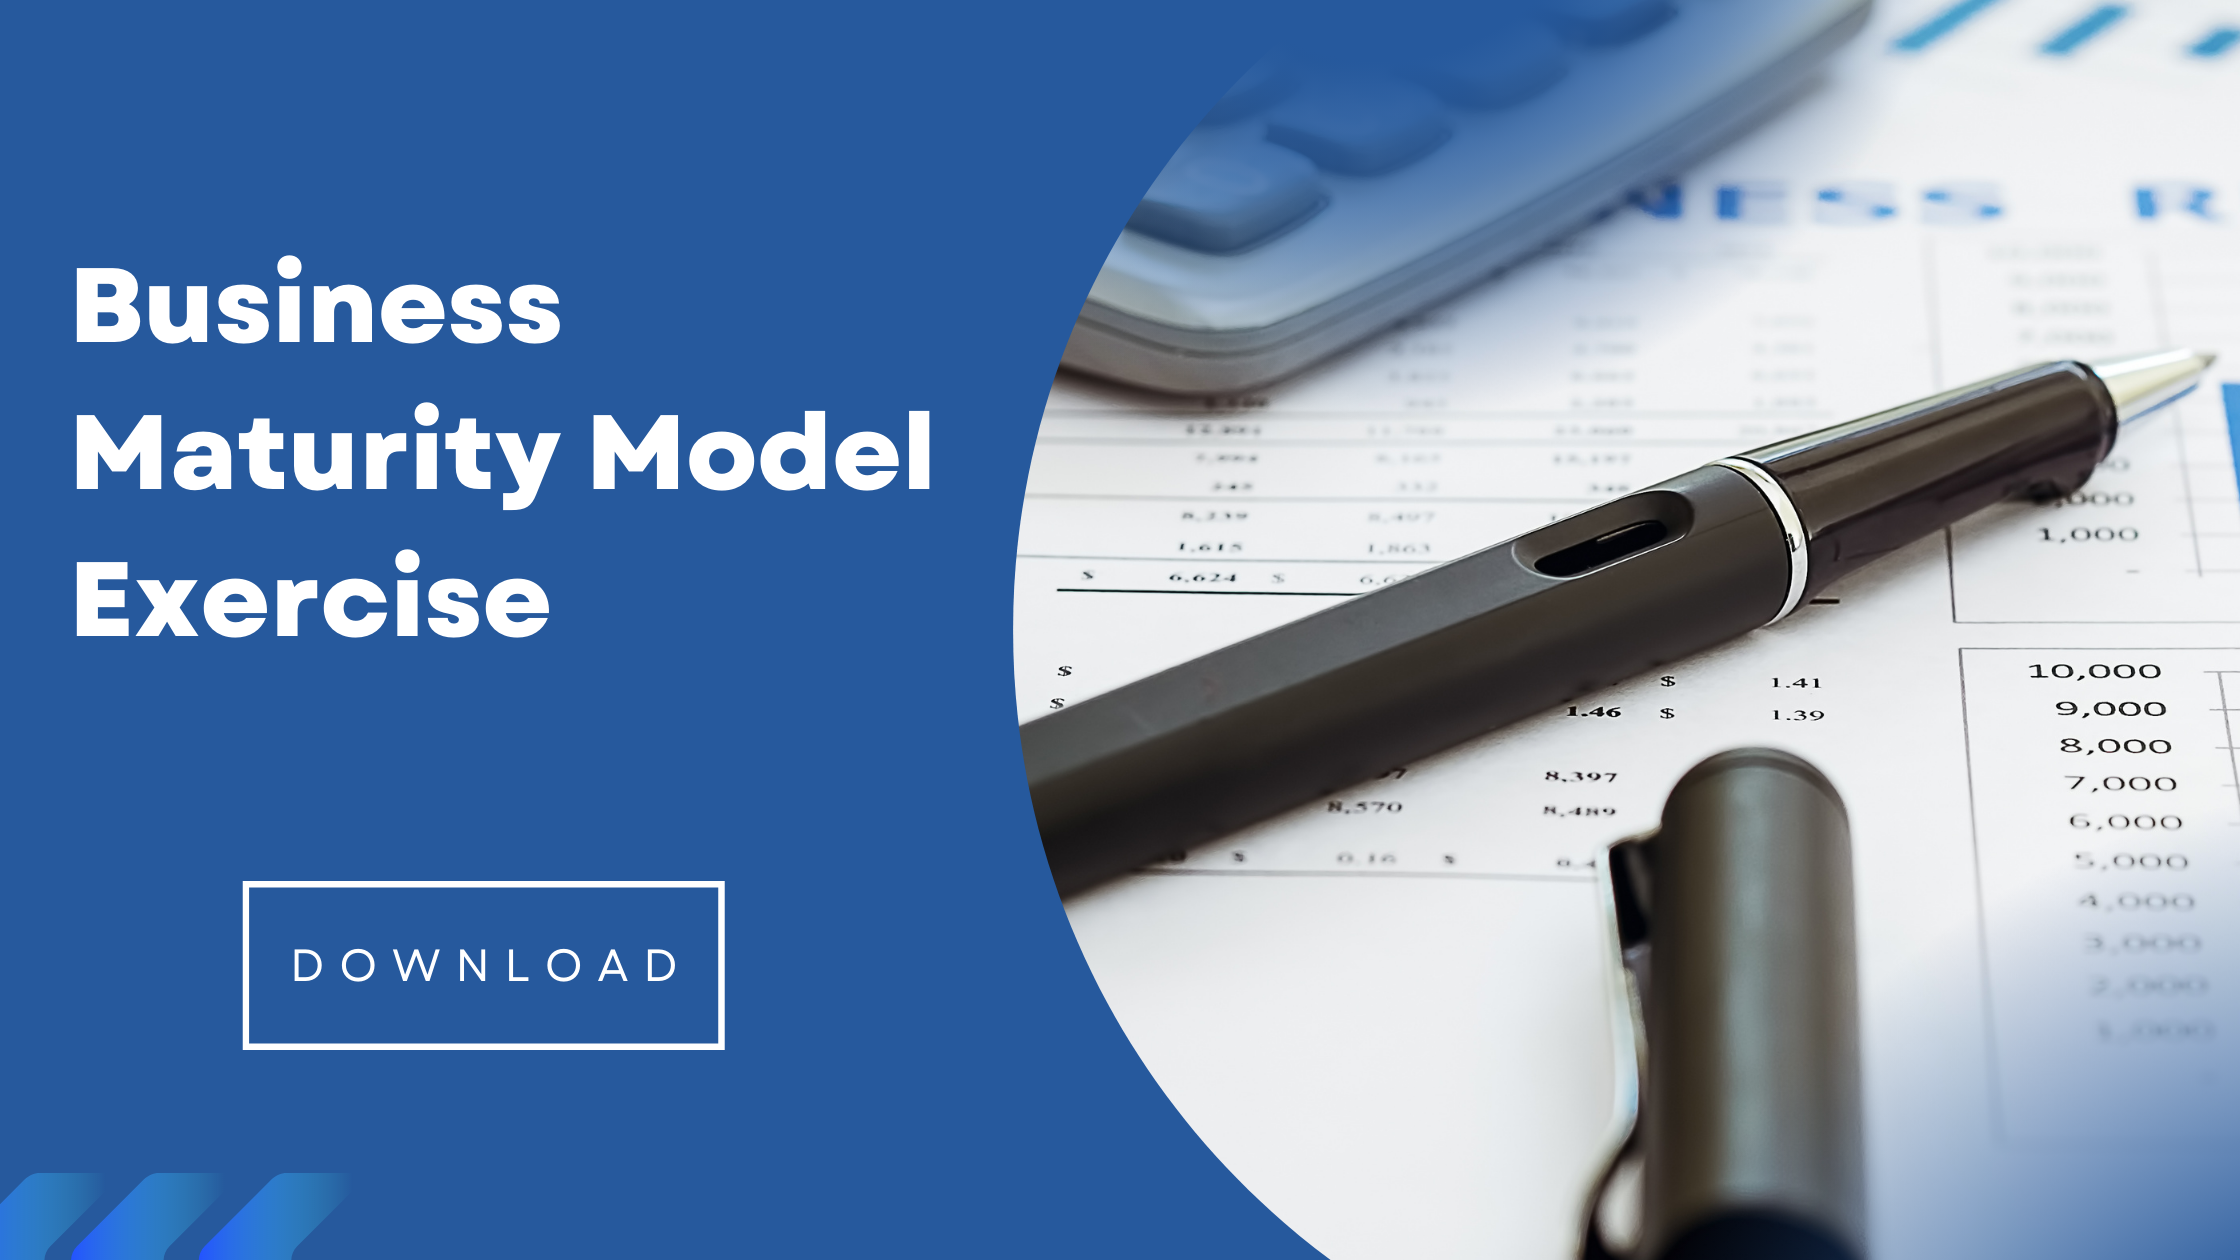 Business maturity model exercise